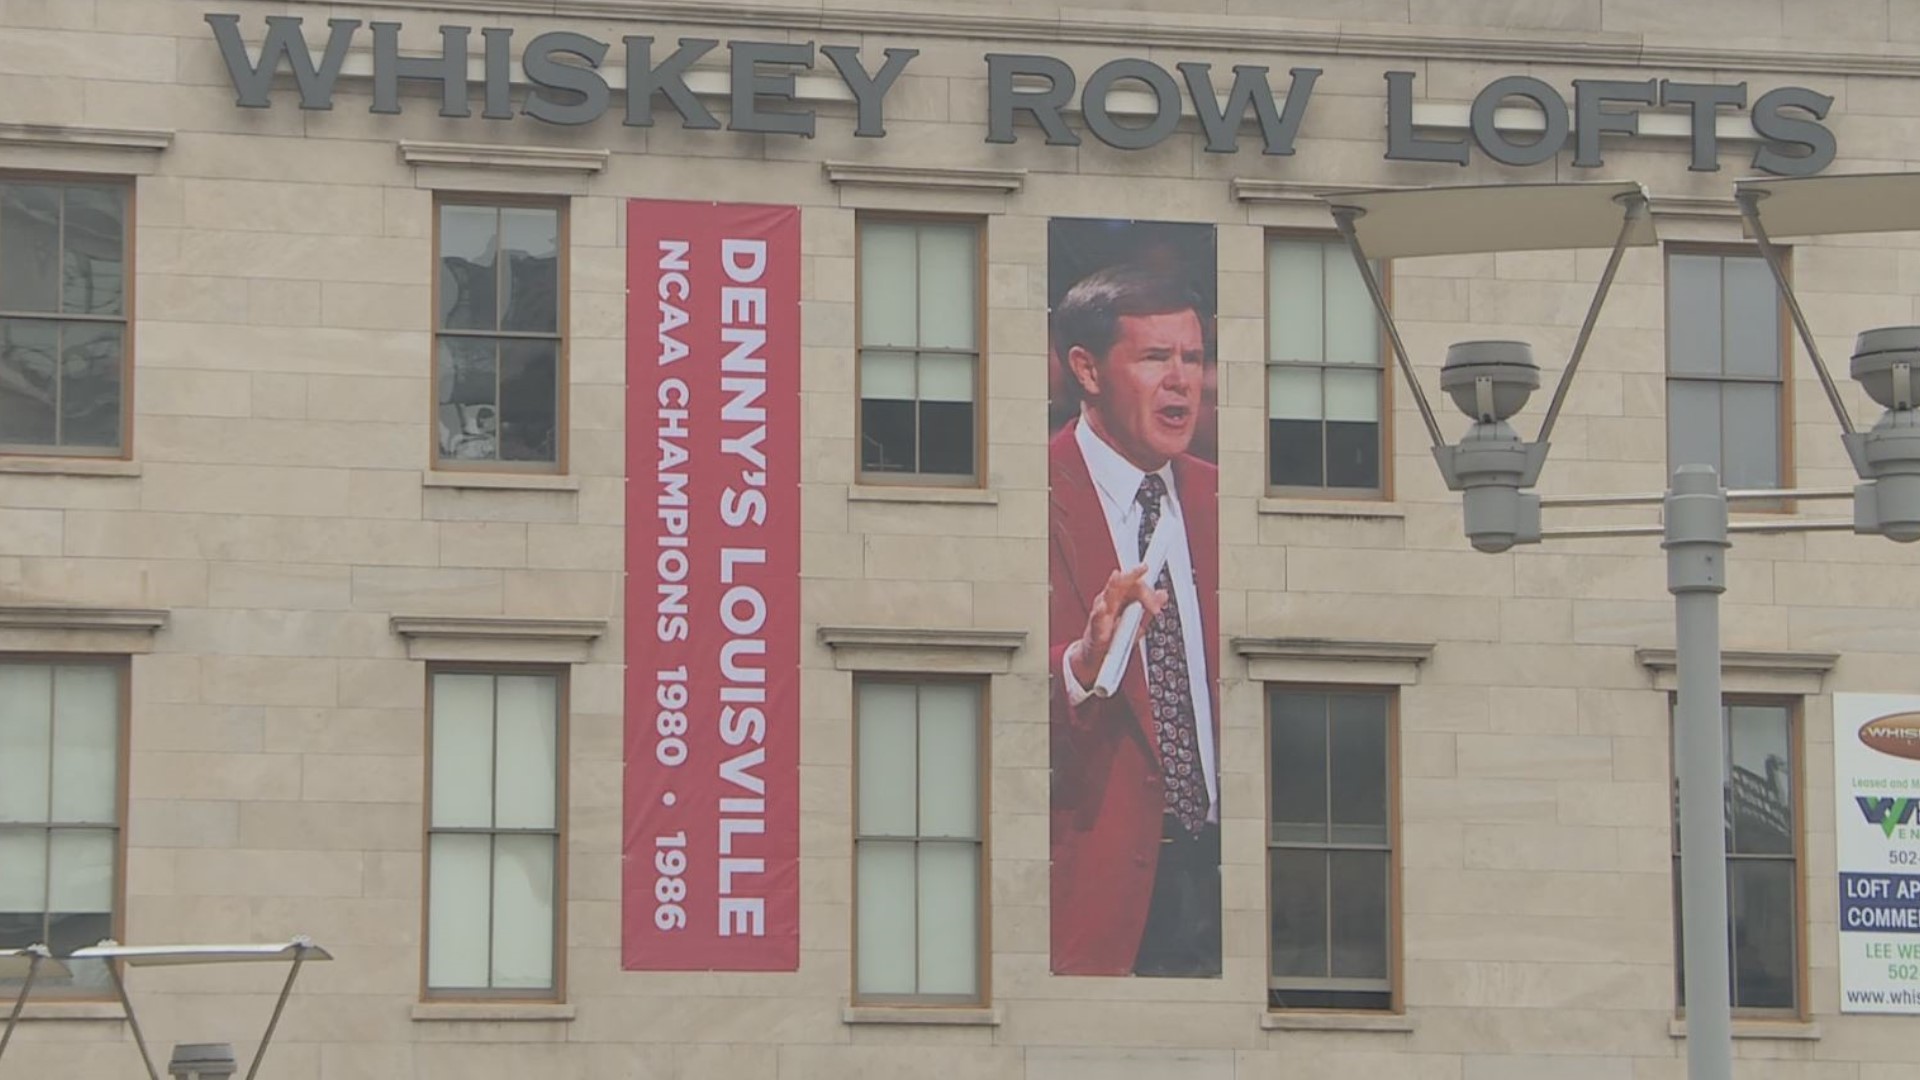 The Hall of Famer who earned two NCAA Championships while at the University of Louisville was honored with a "Hometown Hero" banner downtown near the KFC Yum! Center